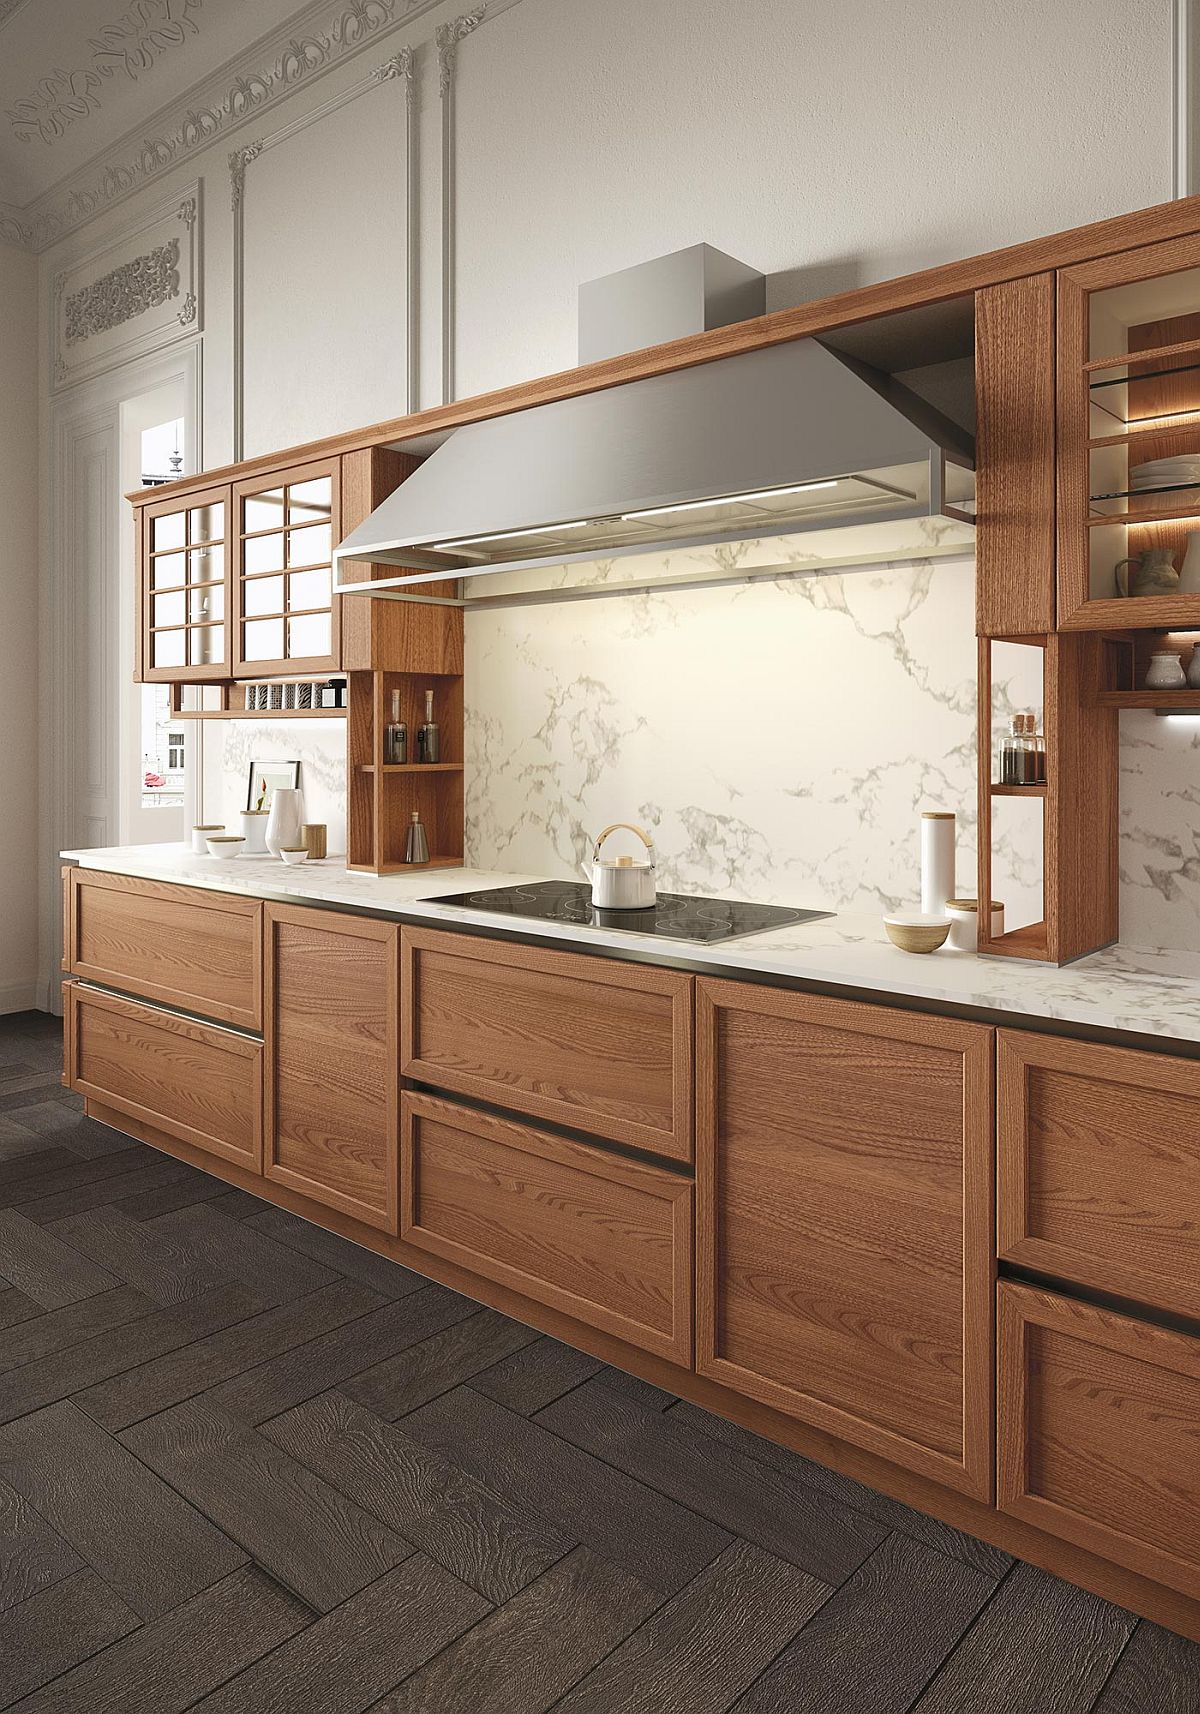 Distinctive hood adds to the traditional appeal of the kitchen